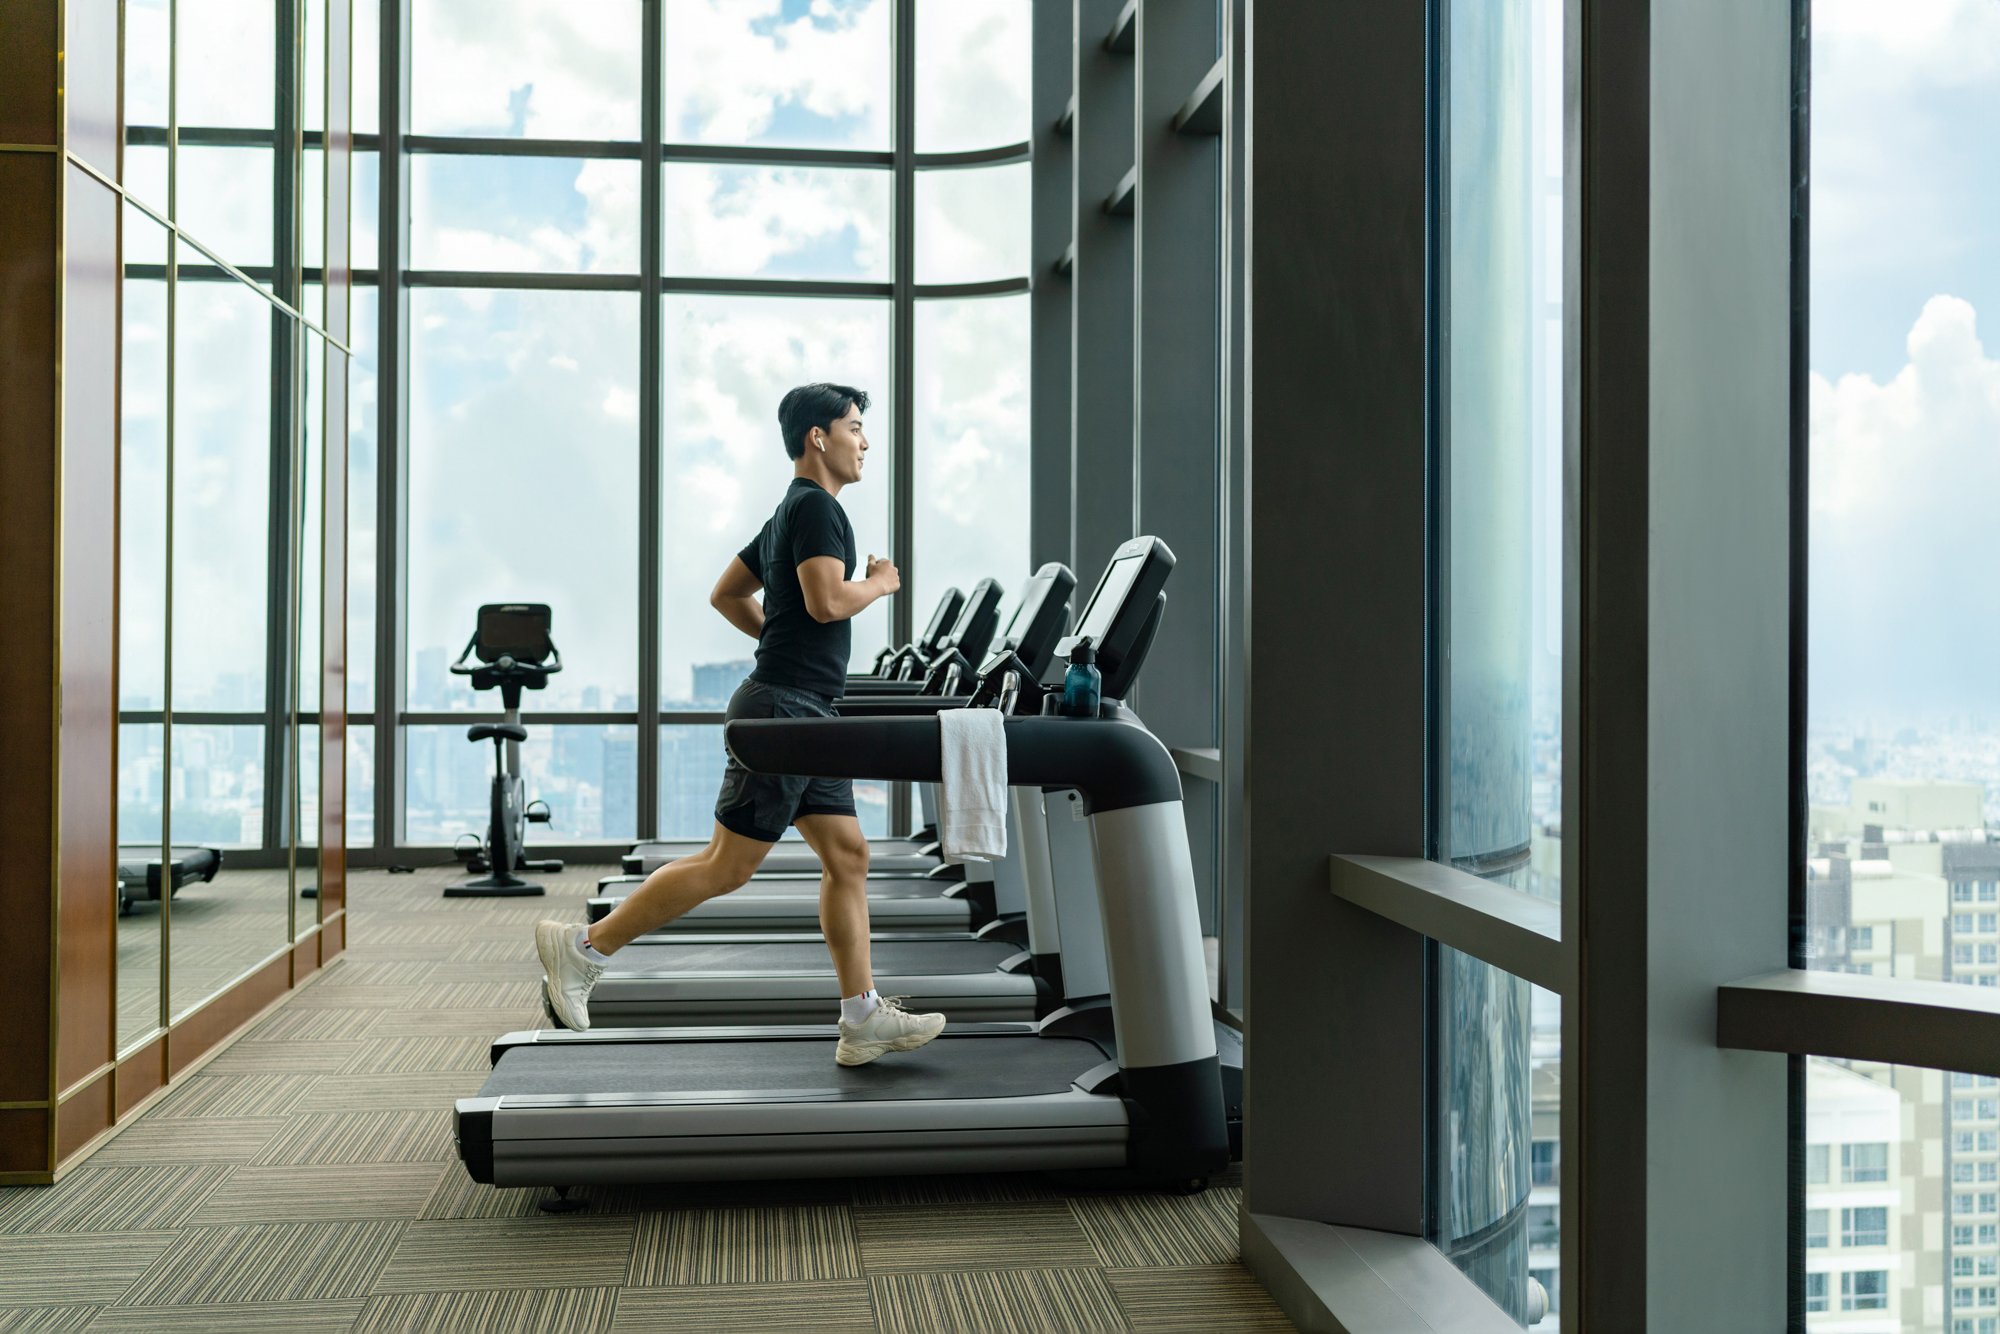 A man runs on a treadmill at a hotel with large window views of the city below